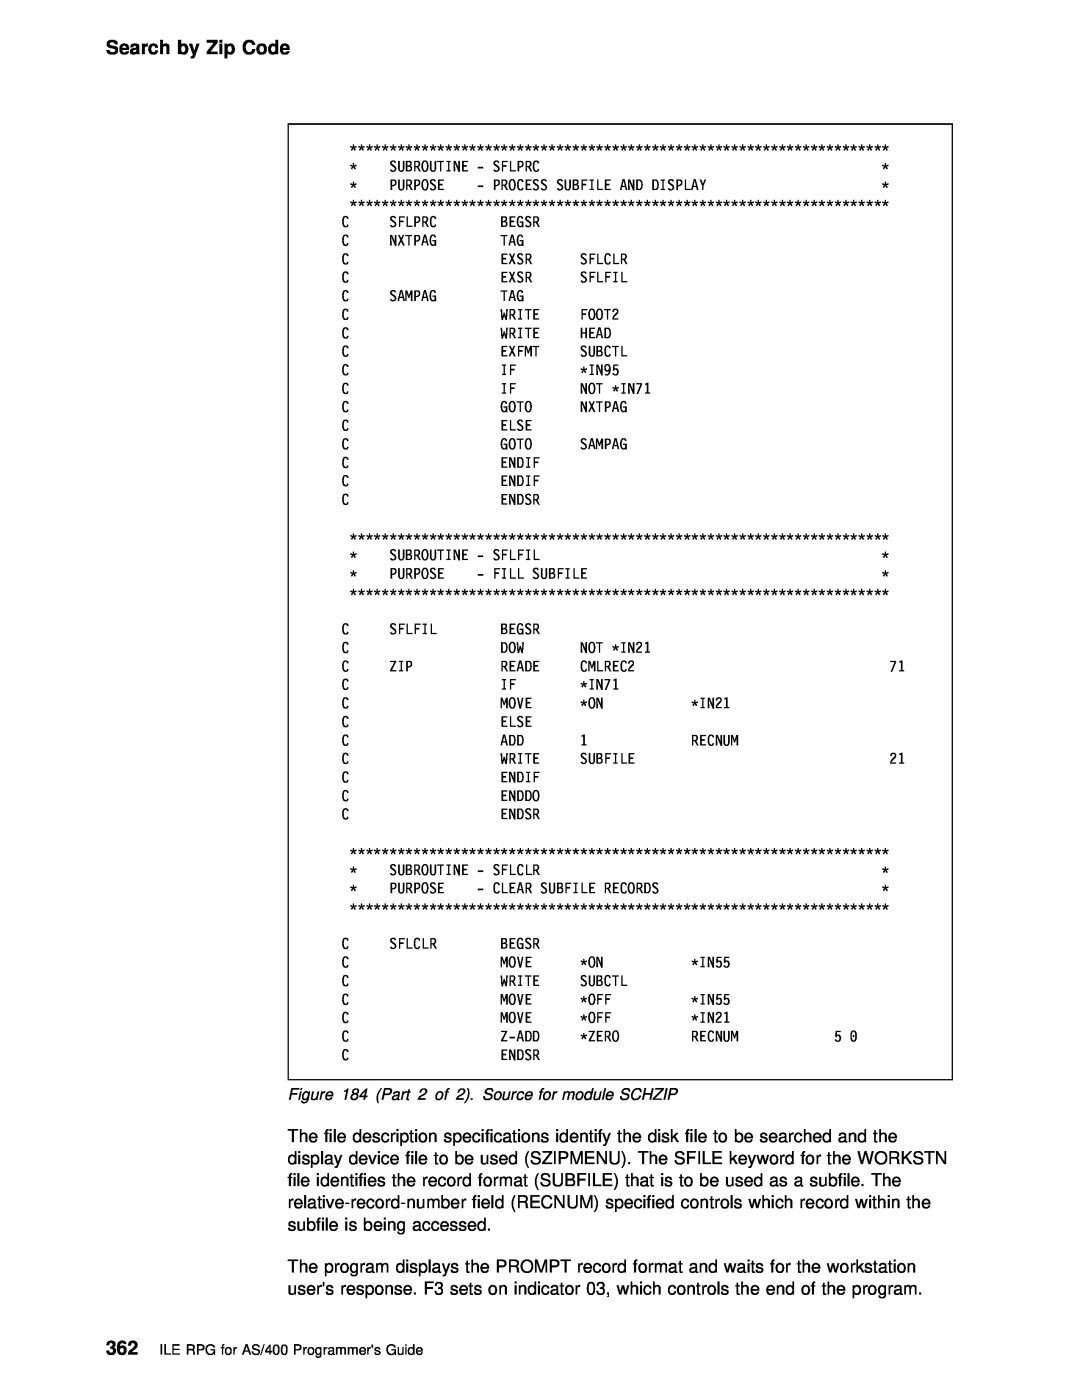 IBM manual Search by Zip Code, ILE RPG for AS/400 Programmers Guide 